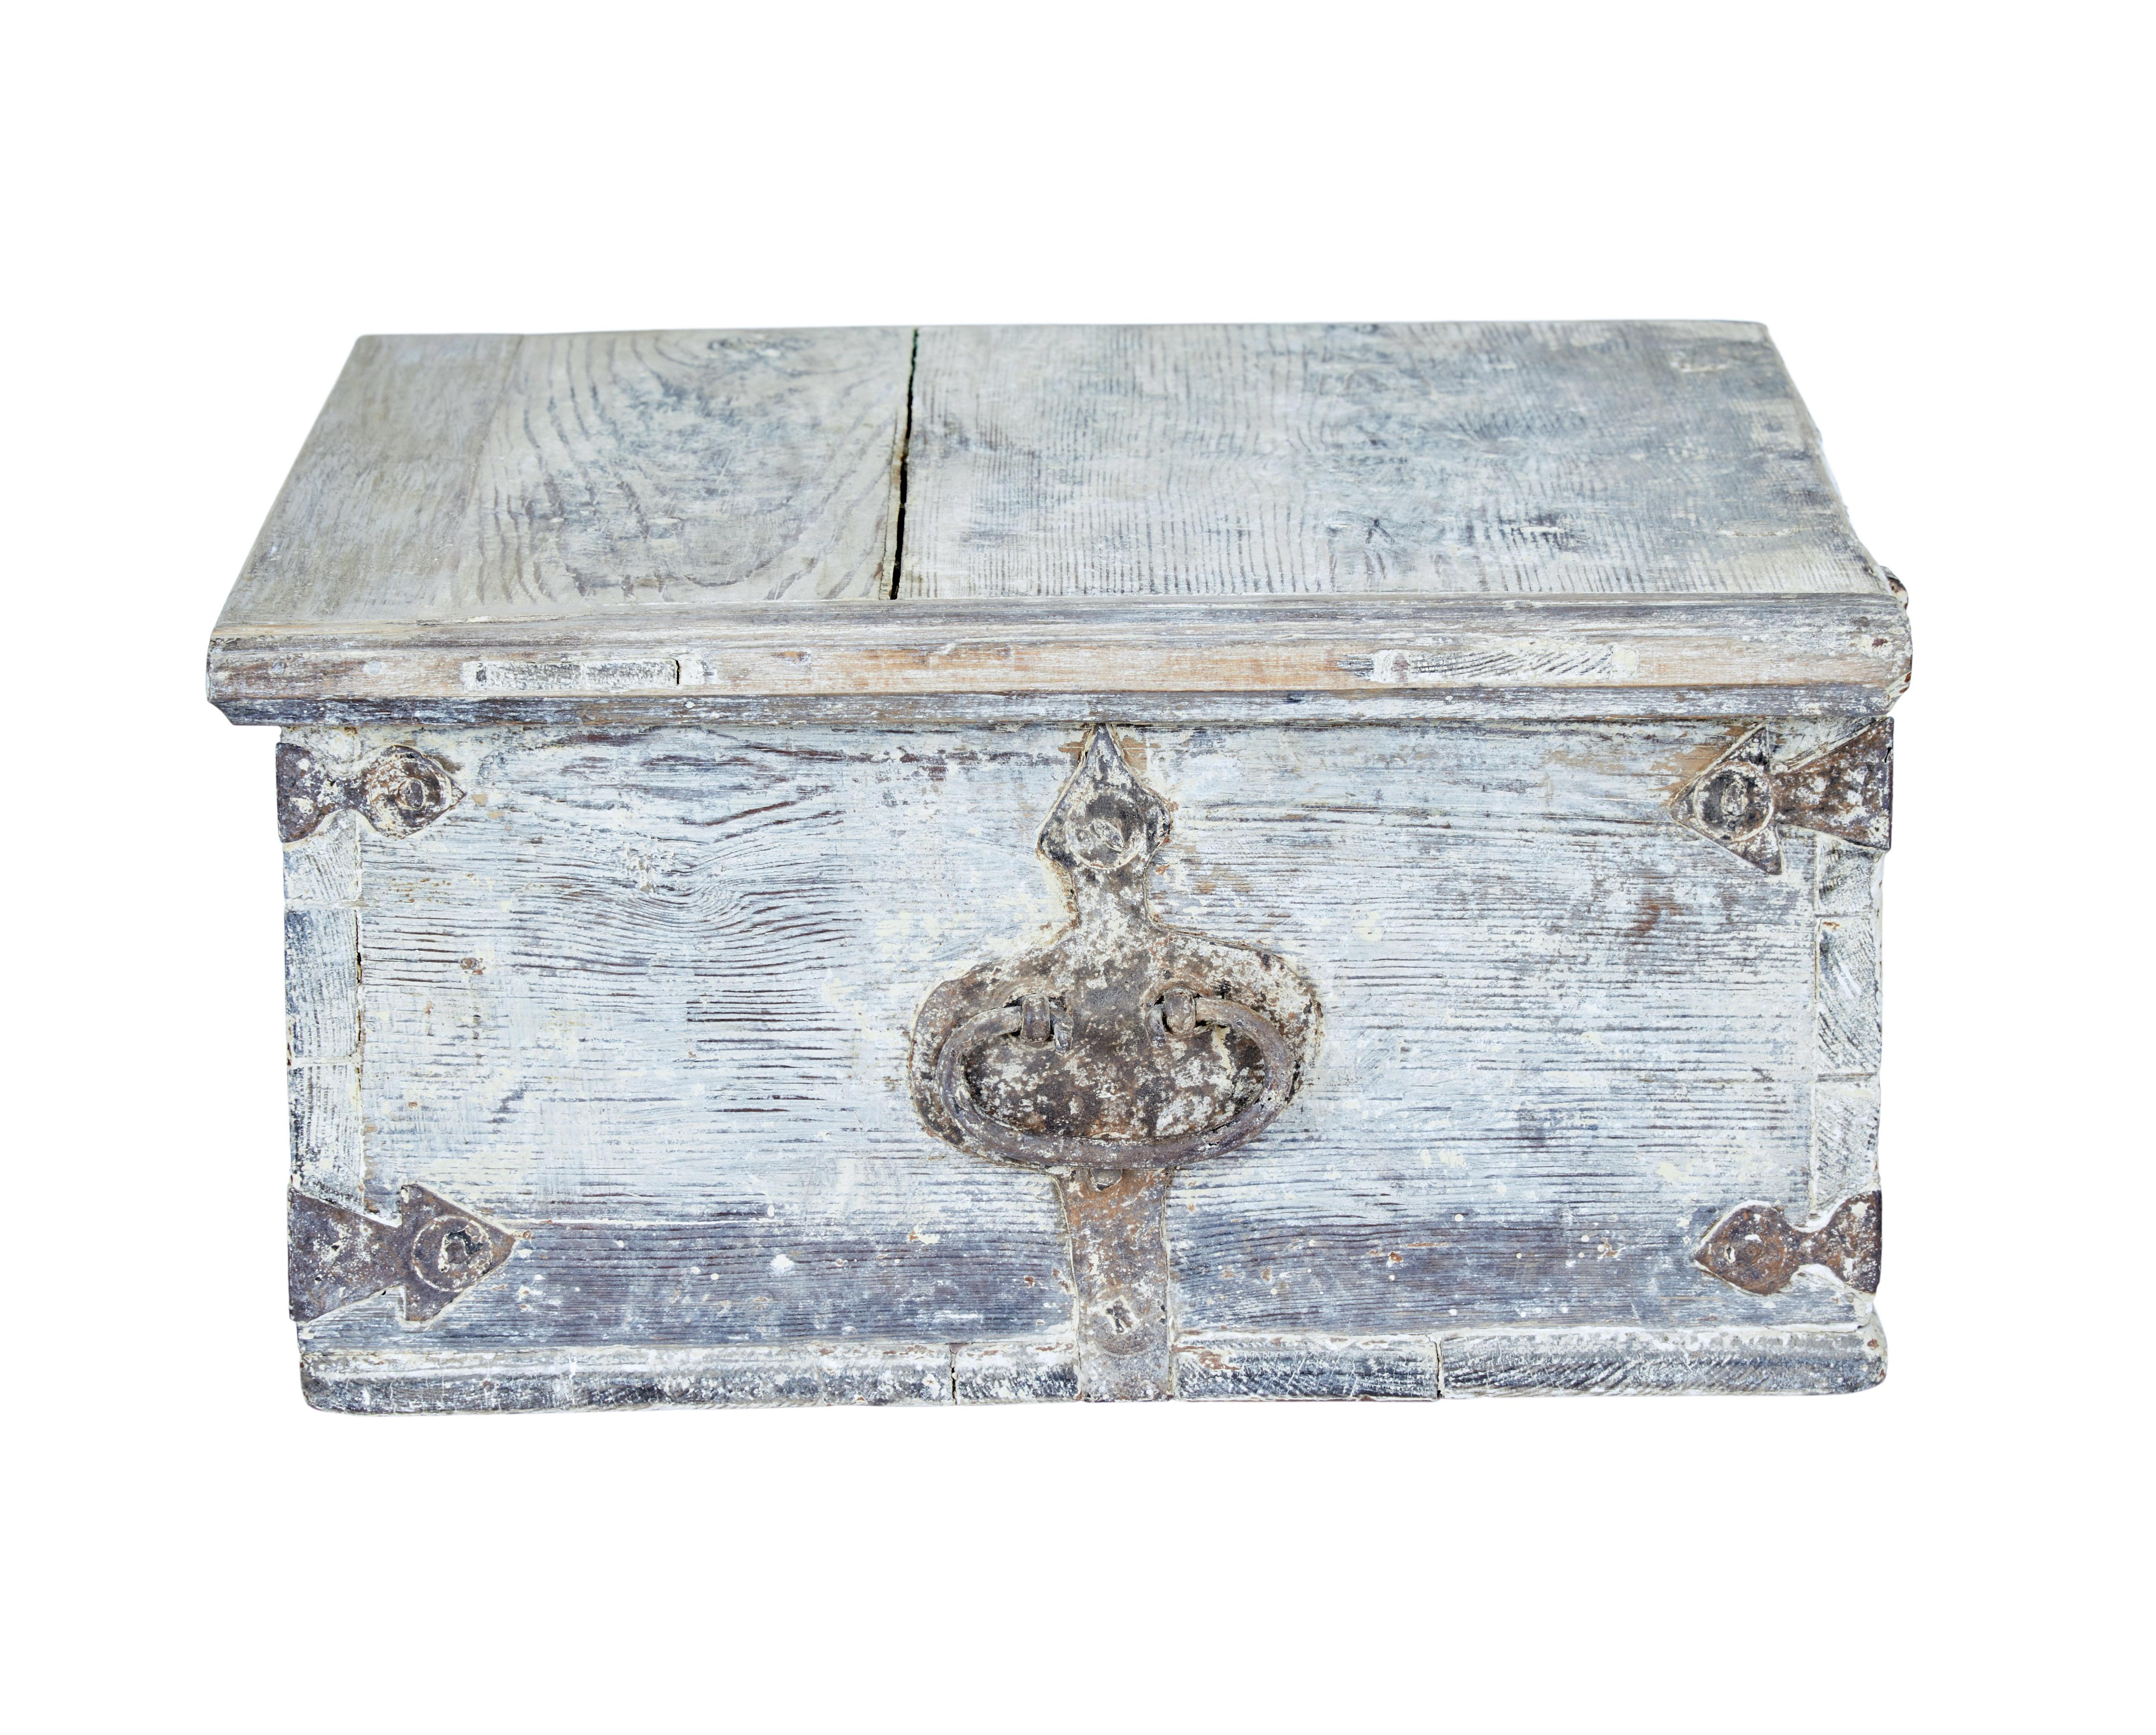 Swedish 18th century painted pine box circa 1790.

Good quality small swedish strong box for keeping valuables safe. Made from pine, with traces of the original paint which has since been covered in a wash.

Original metal work and hinges, lock